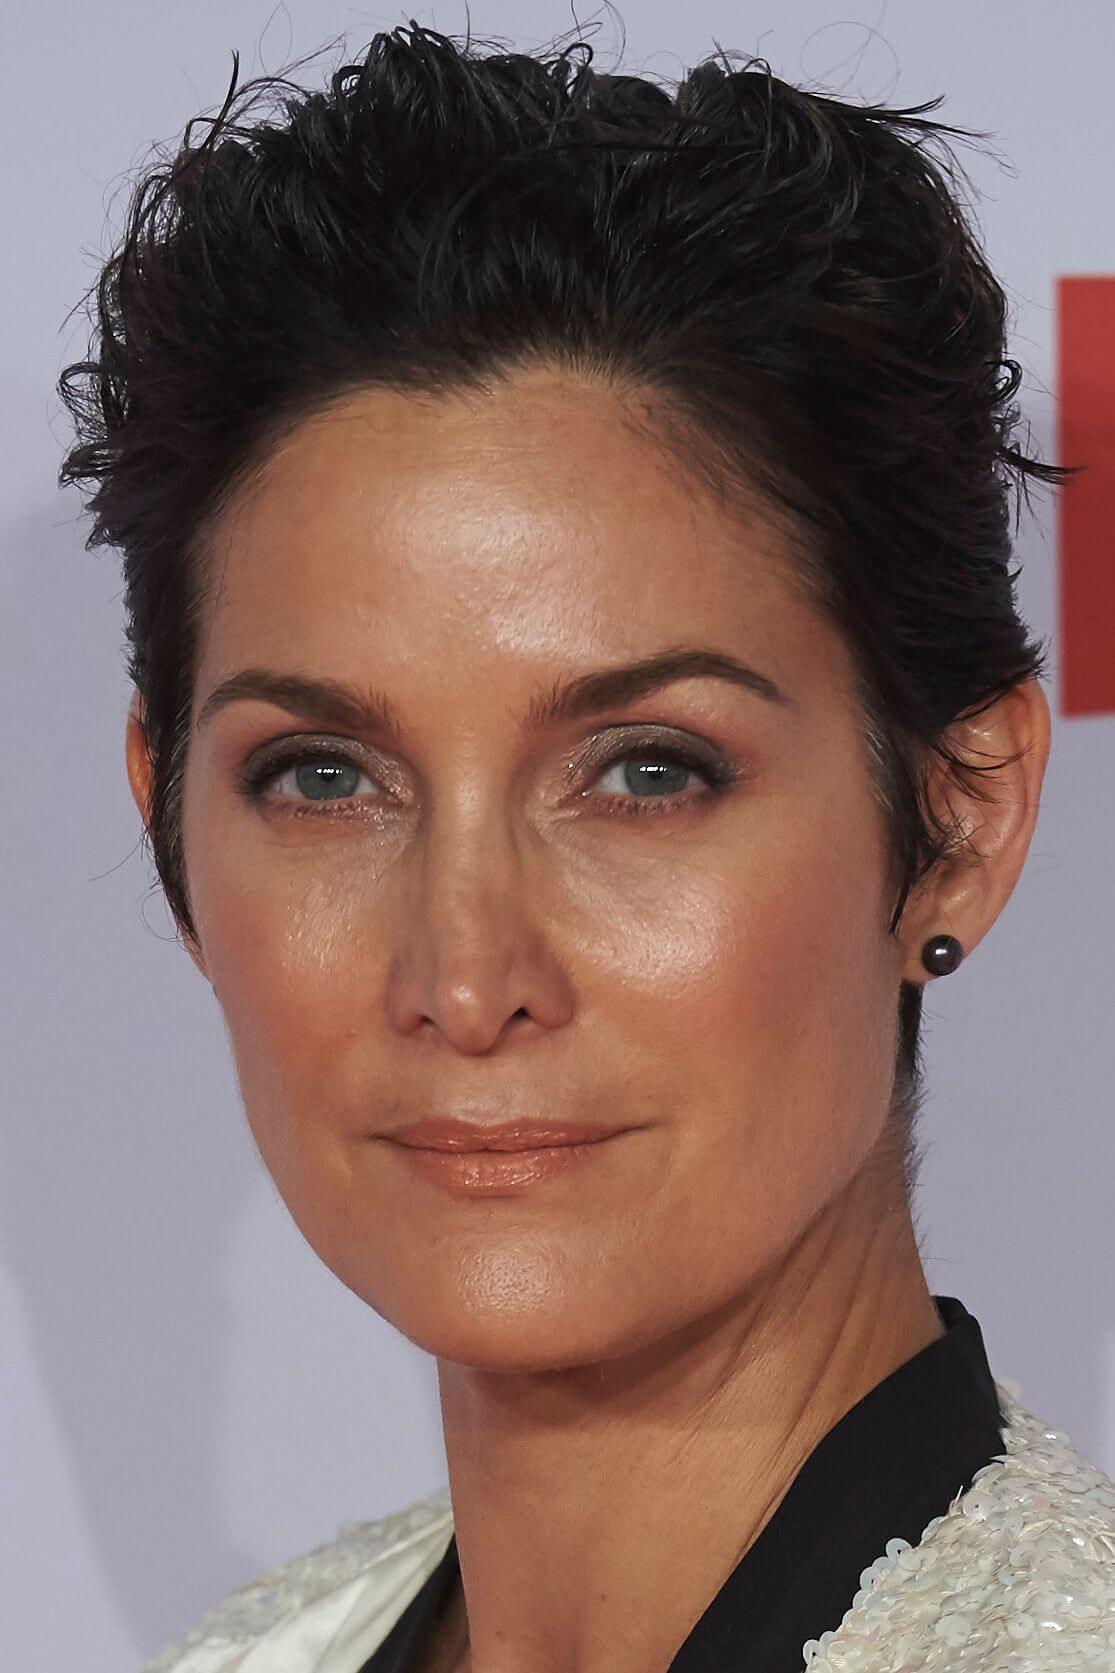 70+ Hot Pictures Of Carrie Anne Moss Will Drive You Nuts For Her 4